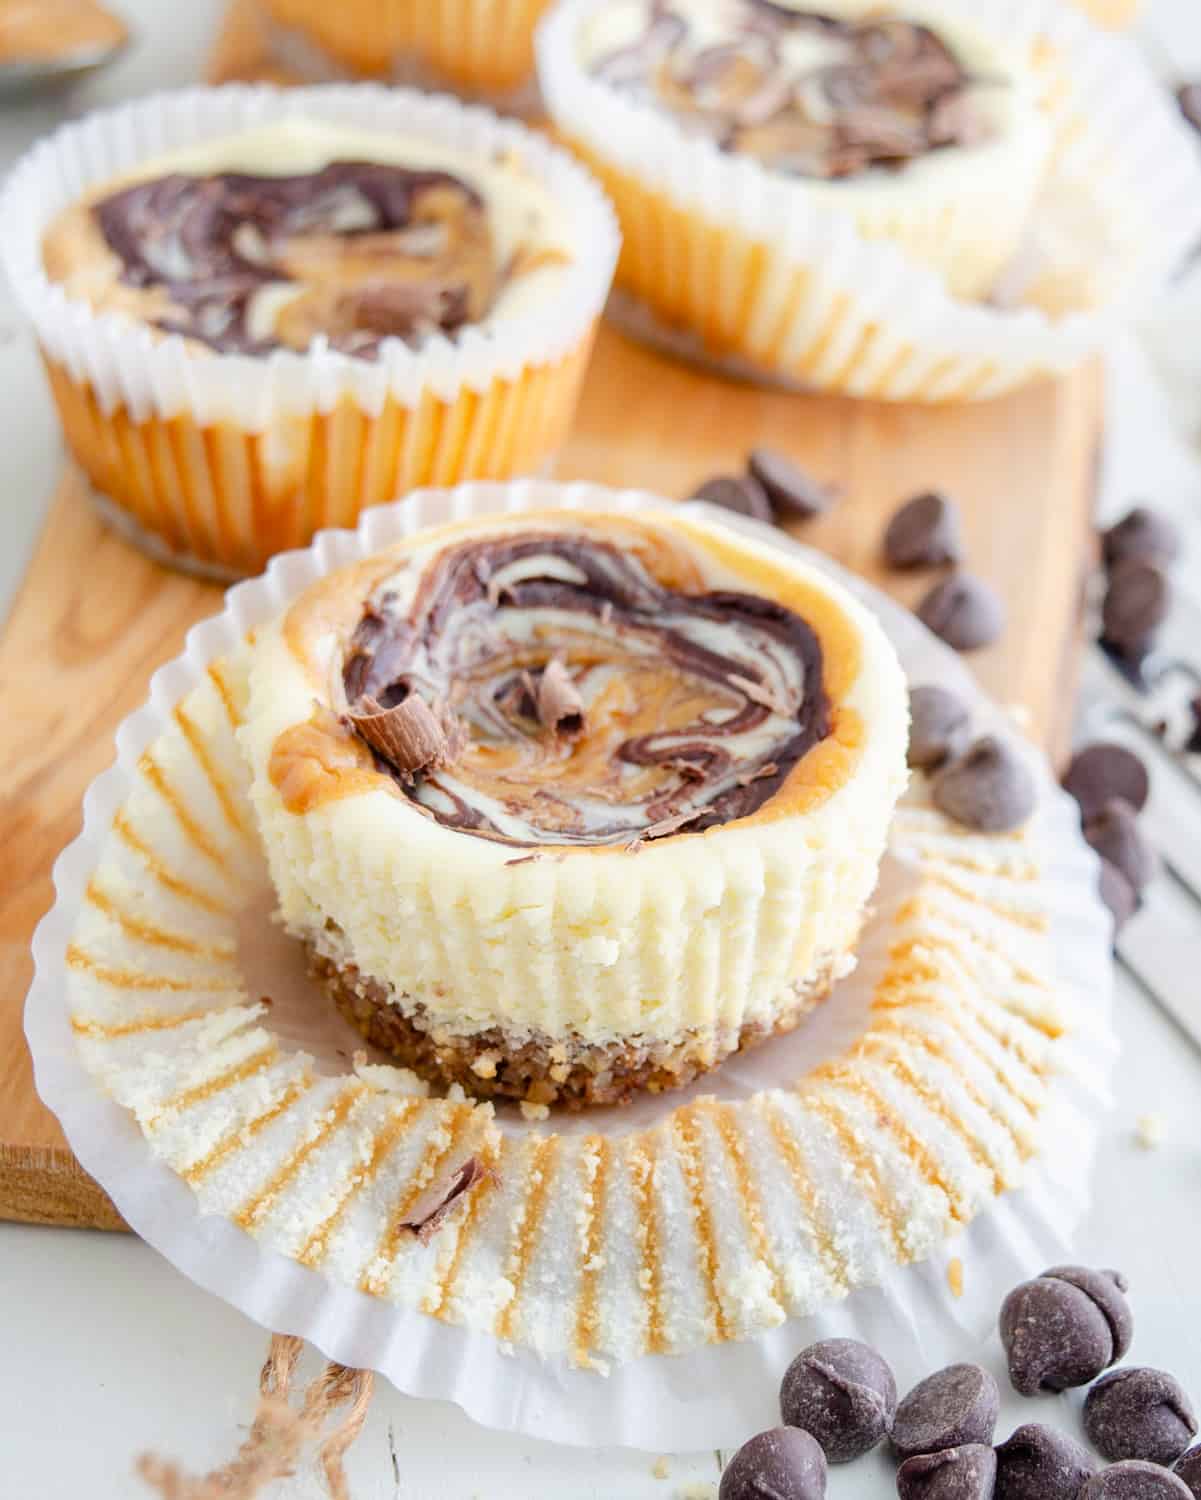 Muffin tin chocolate peanut butter keto cheesecakes being unwrapped from muffin papers.